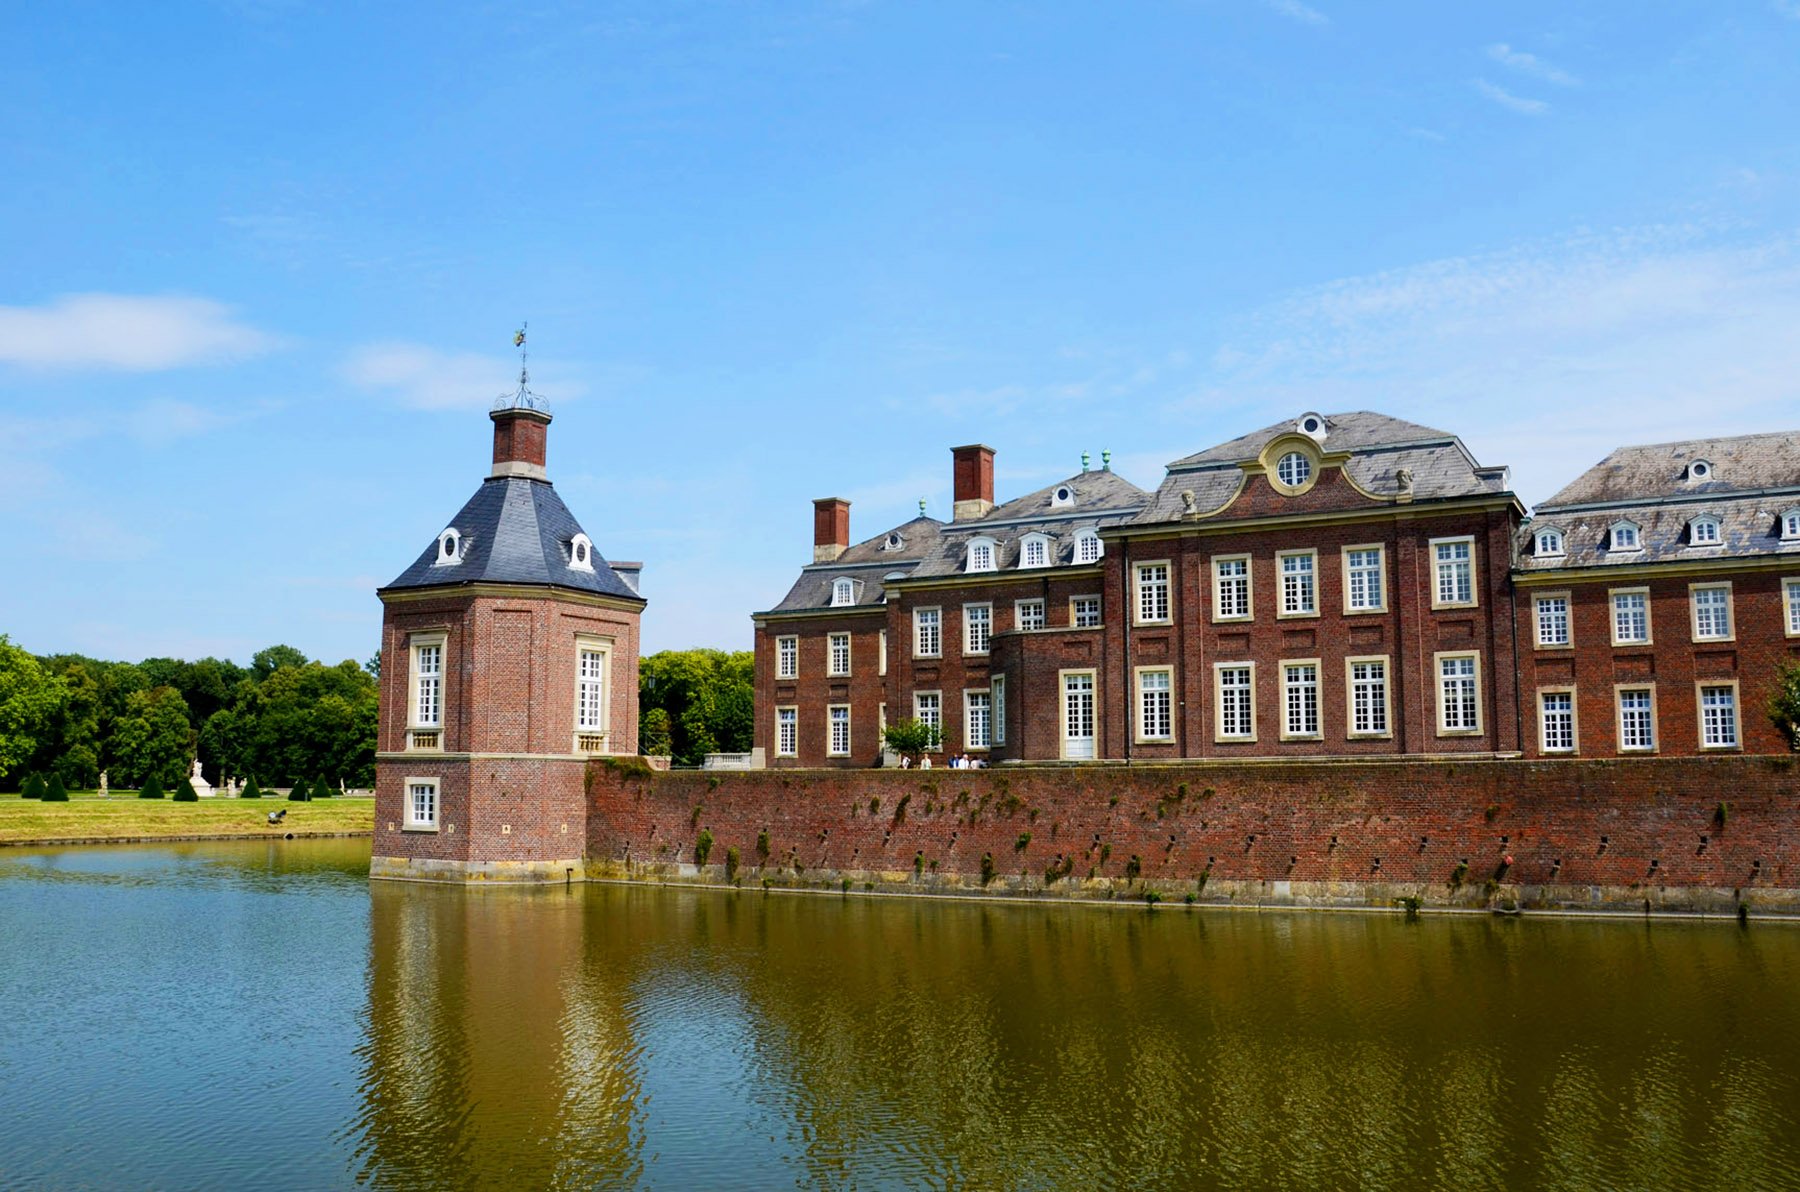 a pond in front of a large brick building